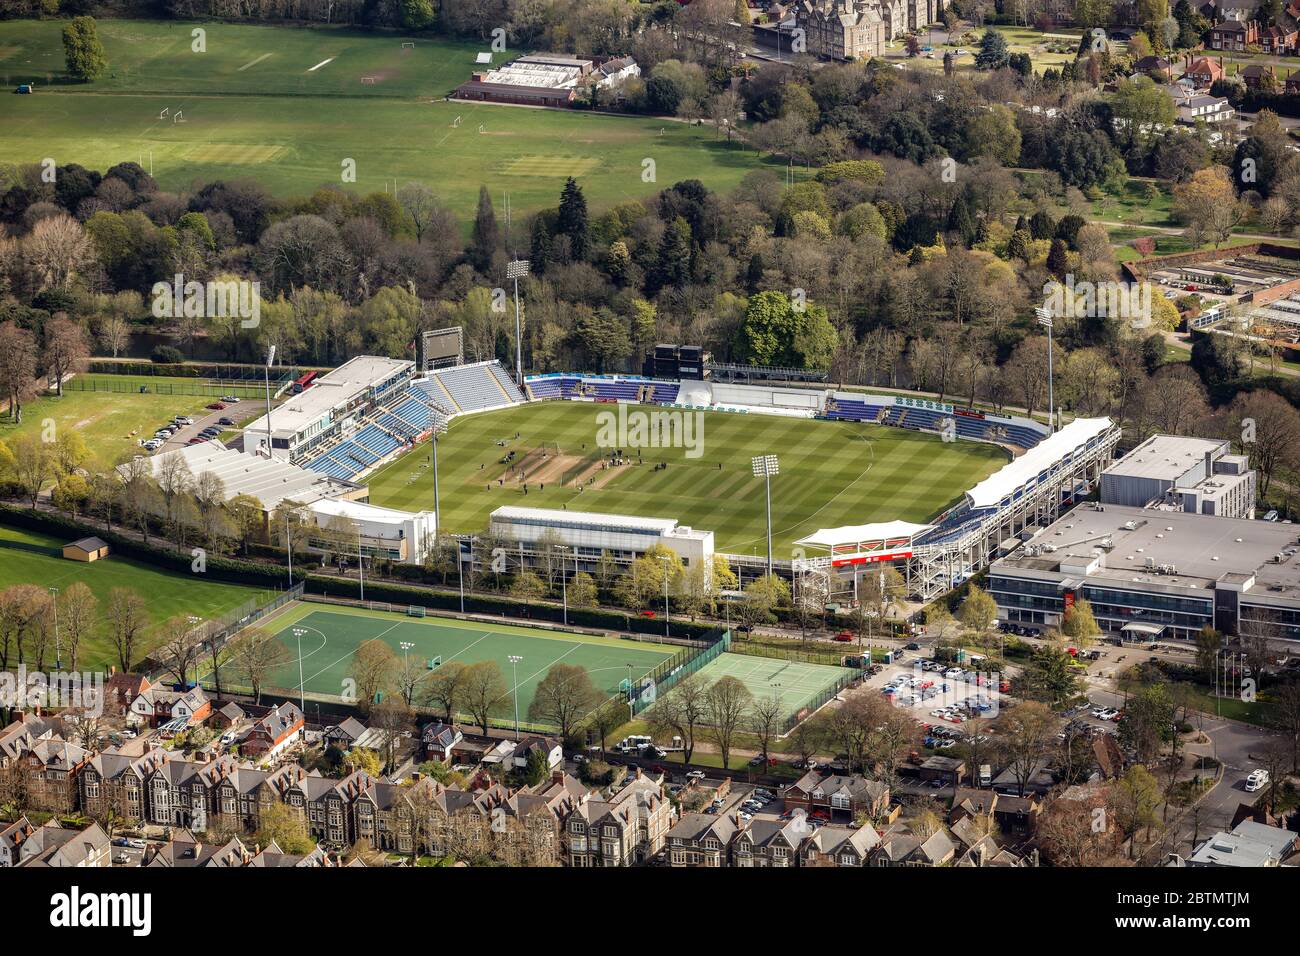 Aerial View of Sophia Gardens Cricket Ground in Cardiff, Wales Stock Photo